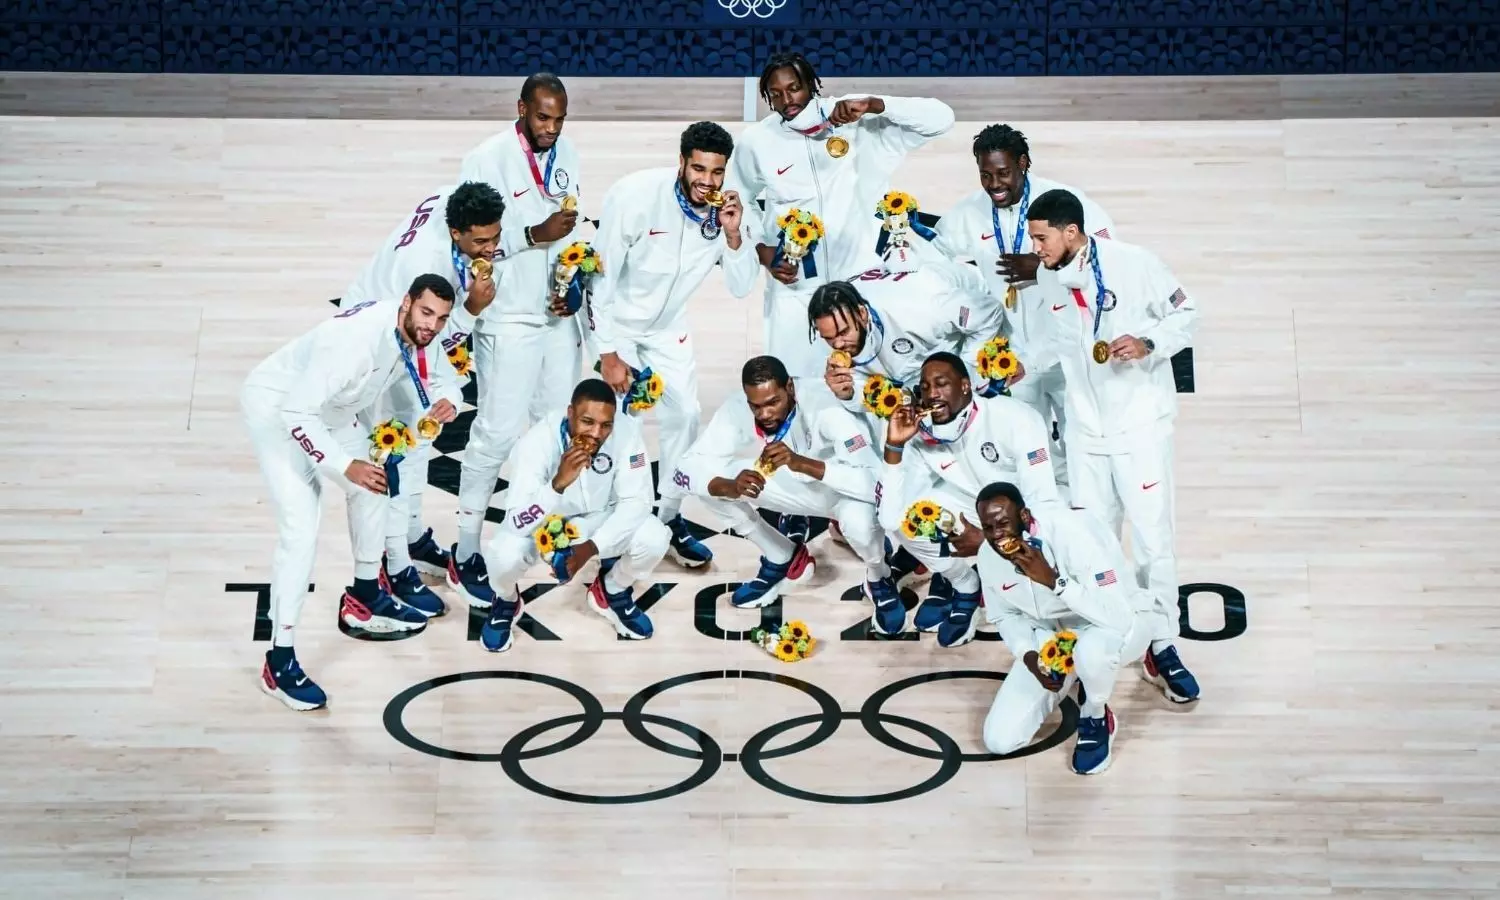 USA men defeat France, claim fourth-straight basketball gold medal